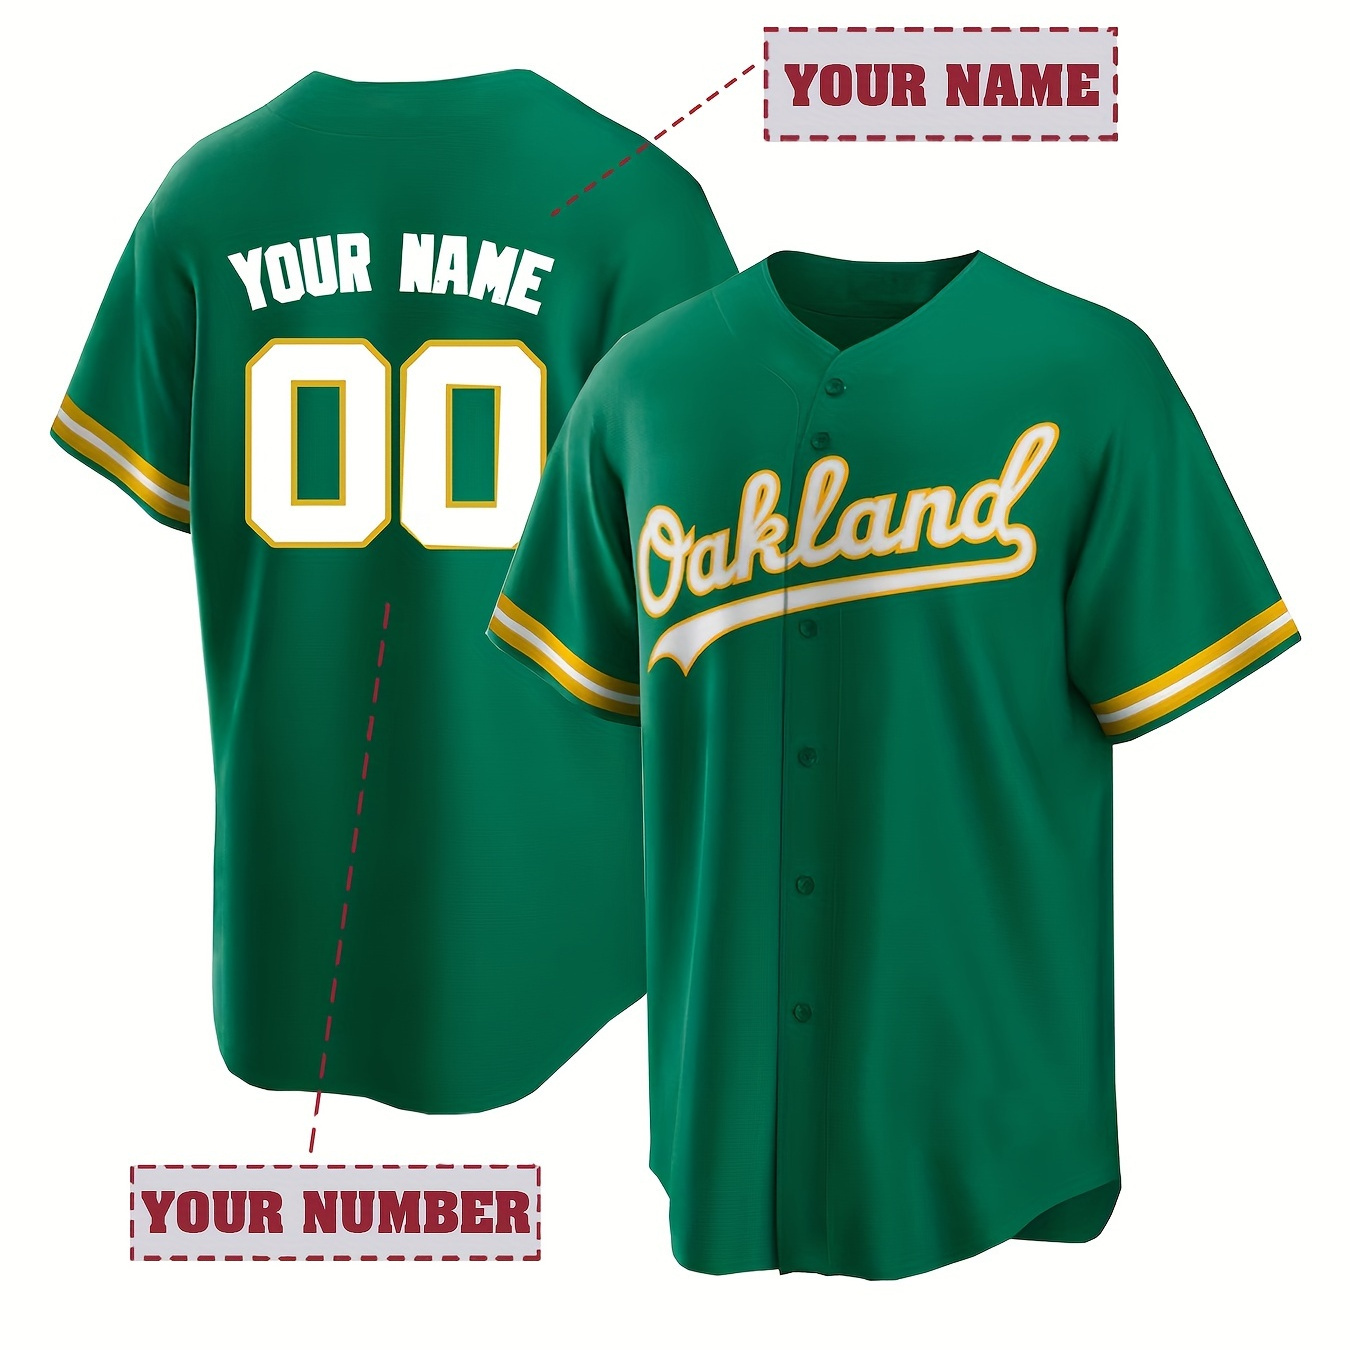 

Customized Name And Number Design, Men's Oakland Embroidery Design Short Sleeve Loose Breathable V-neck Baseball Jersey, Sports Shirt For Team Training